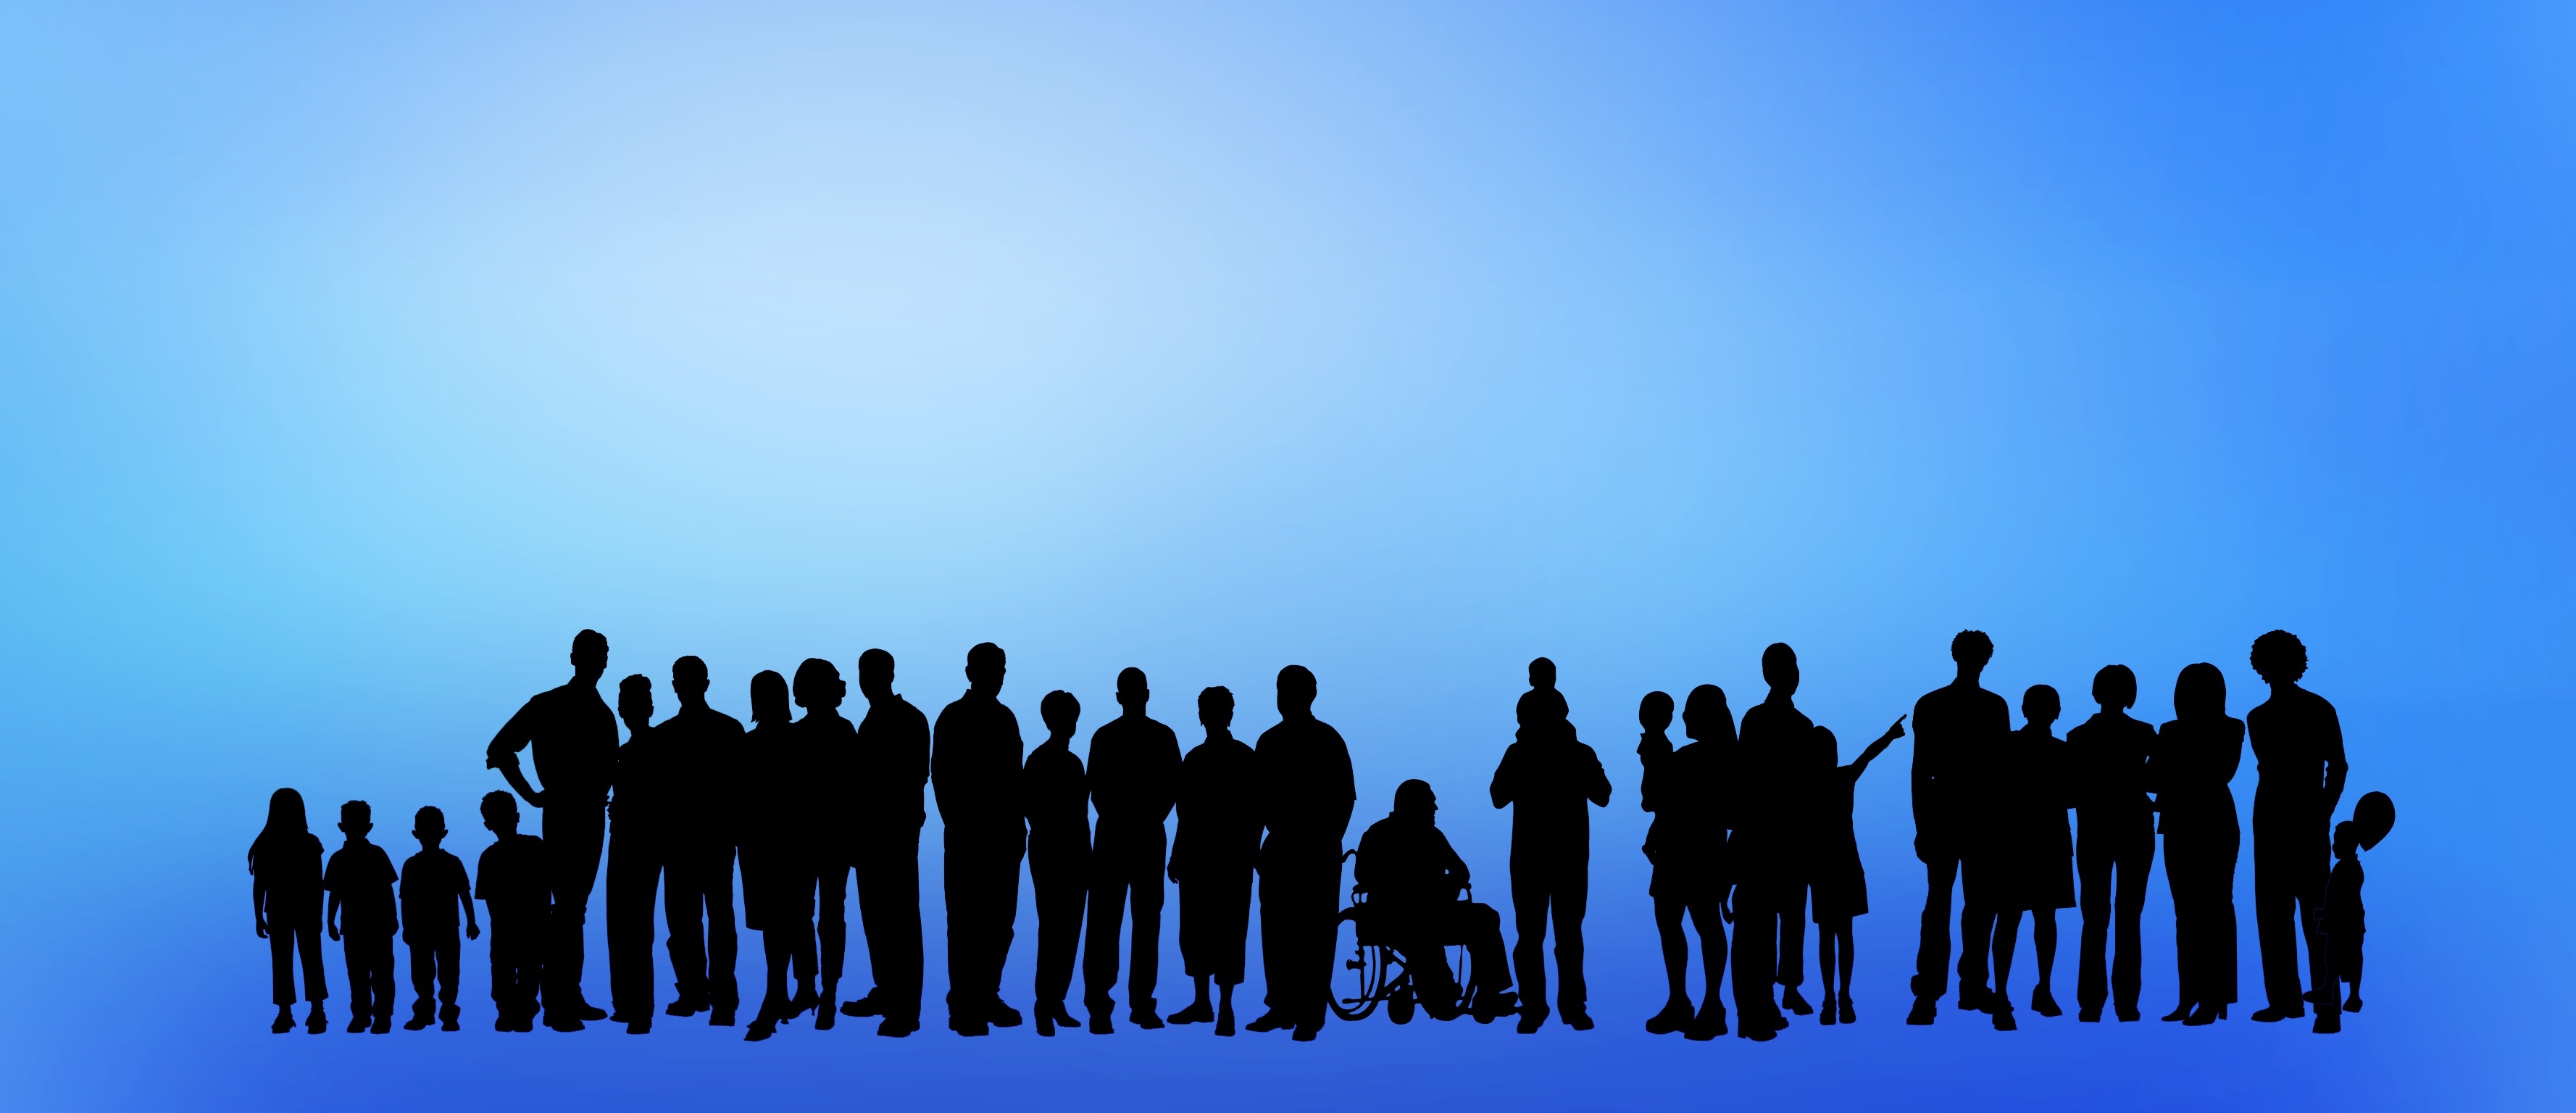 Silhouette of a large group of adults and children including a wheelchair user